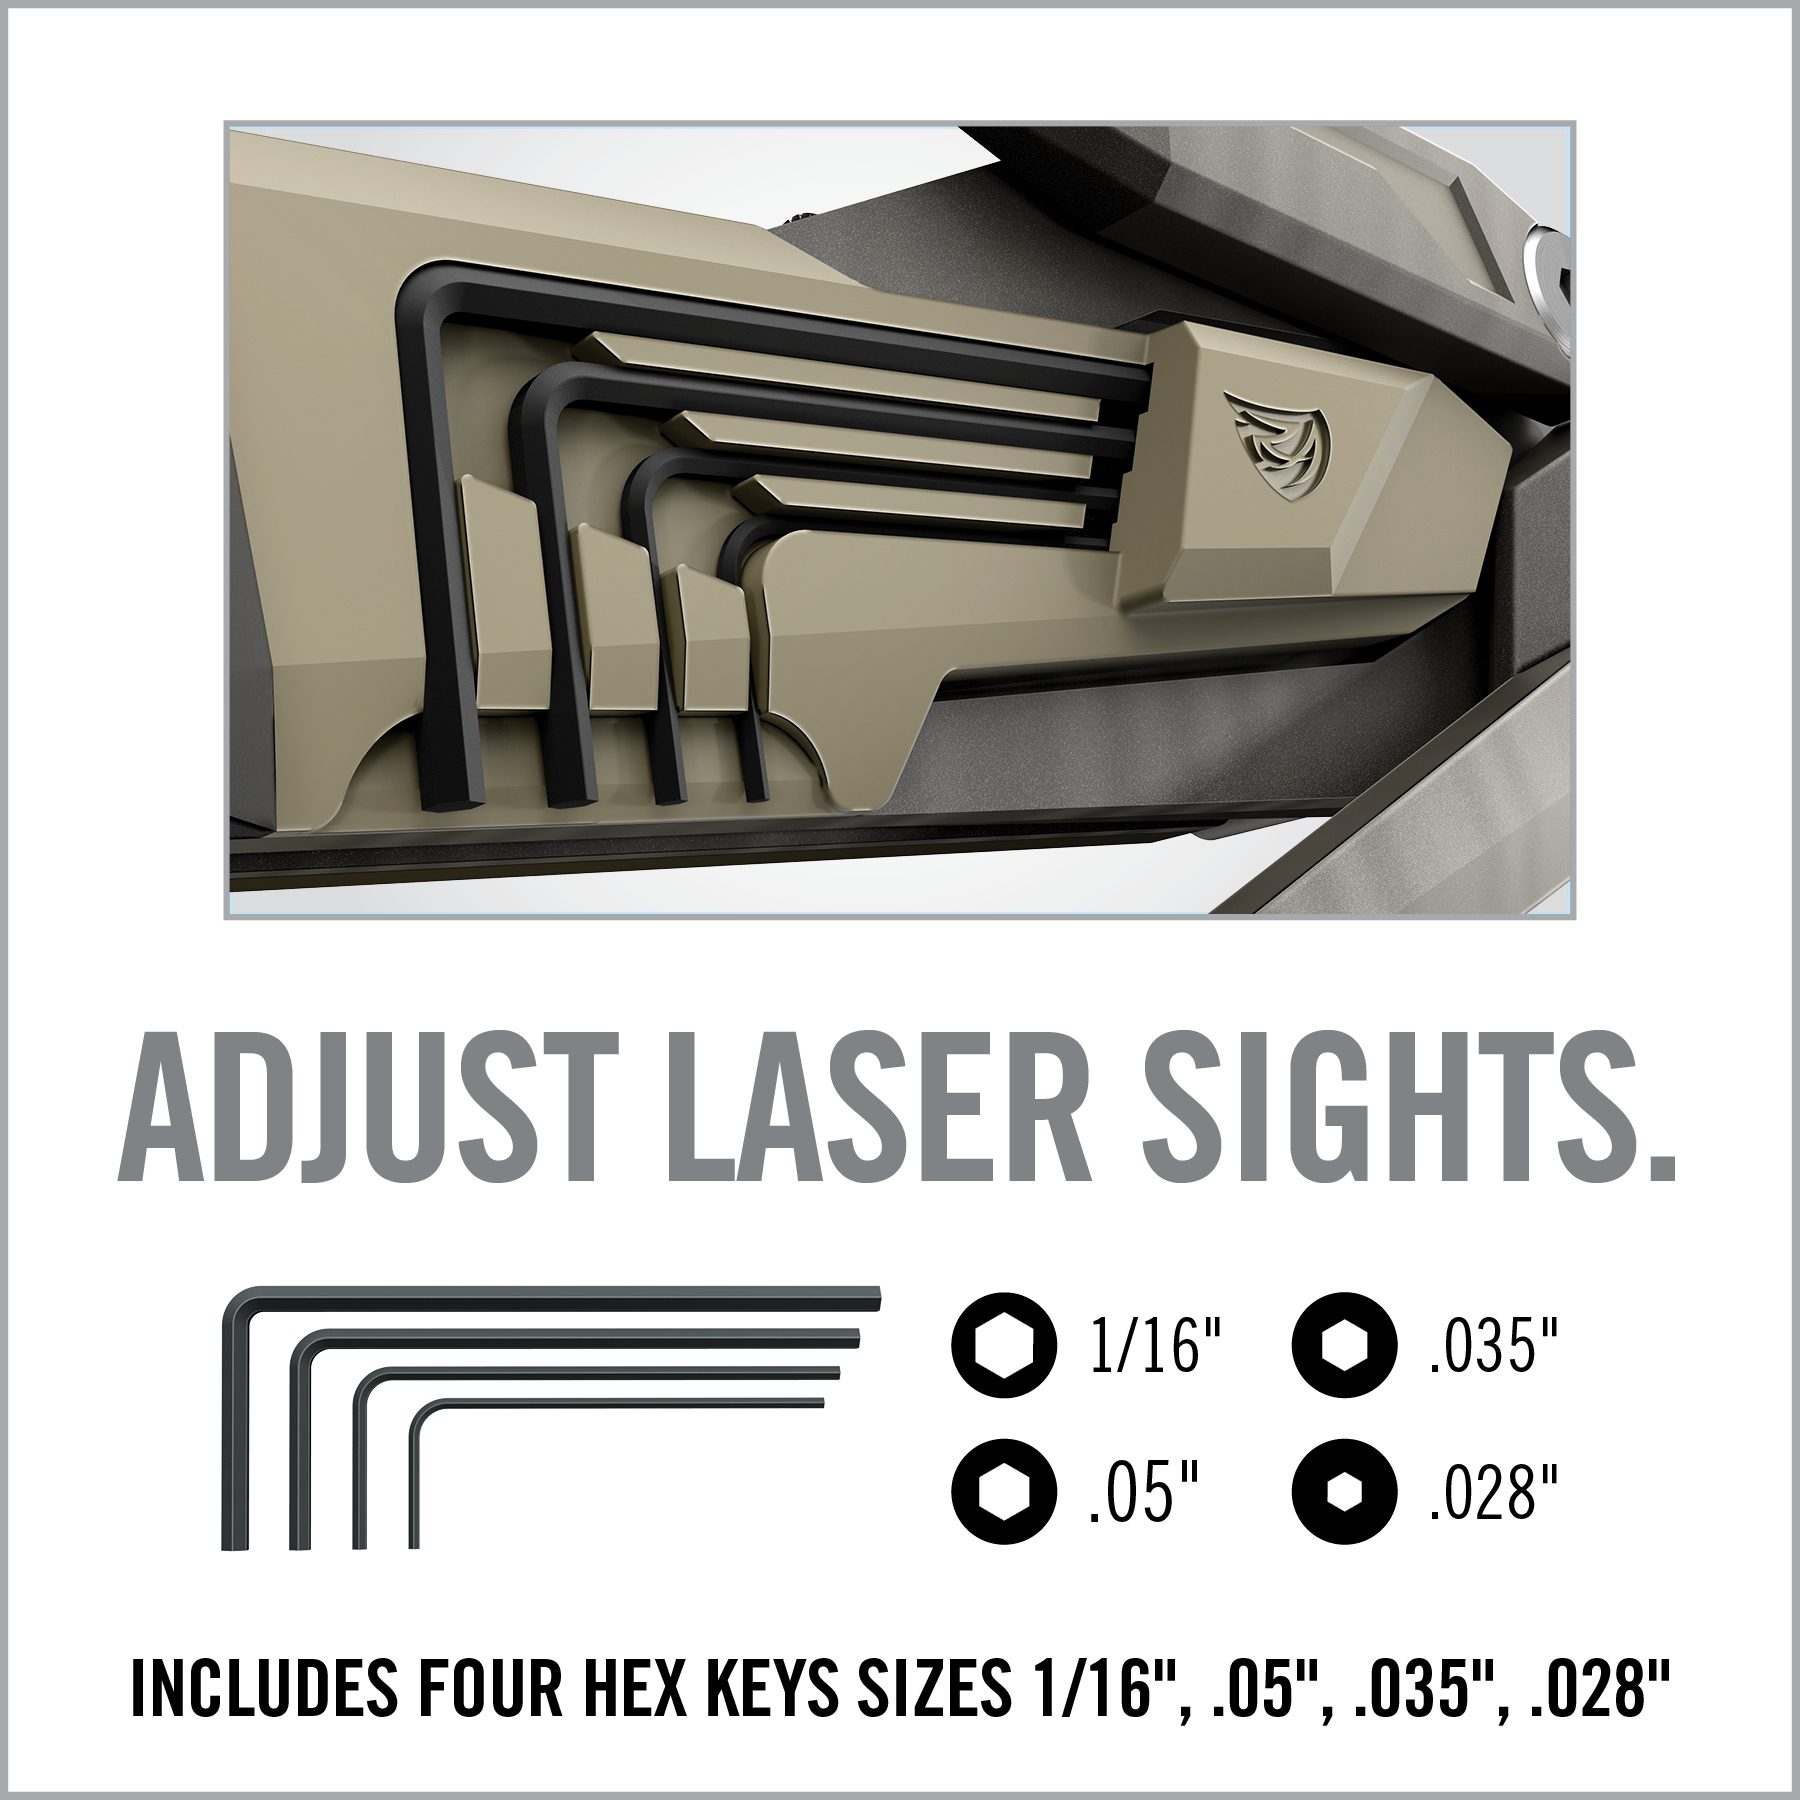 an advertise poster for a laser sight system